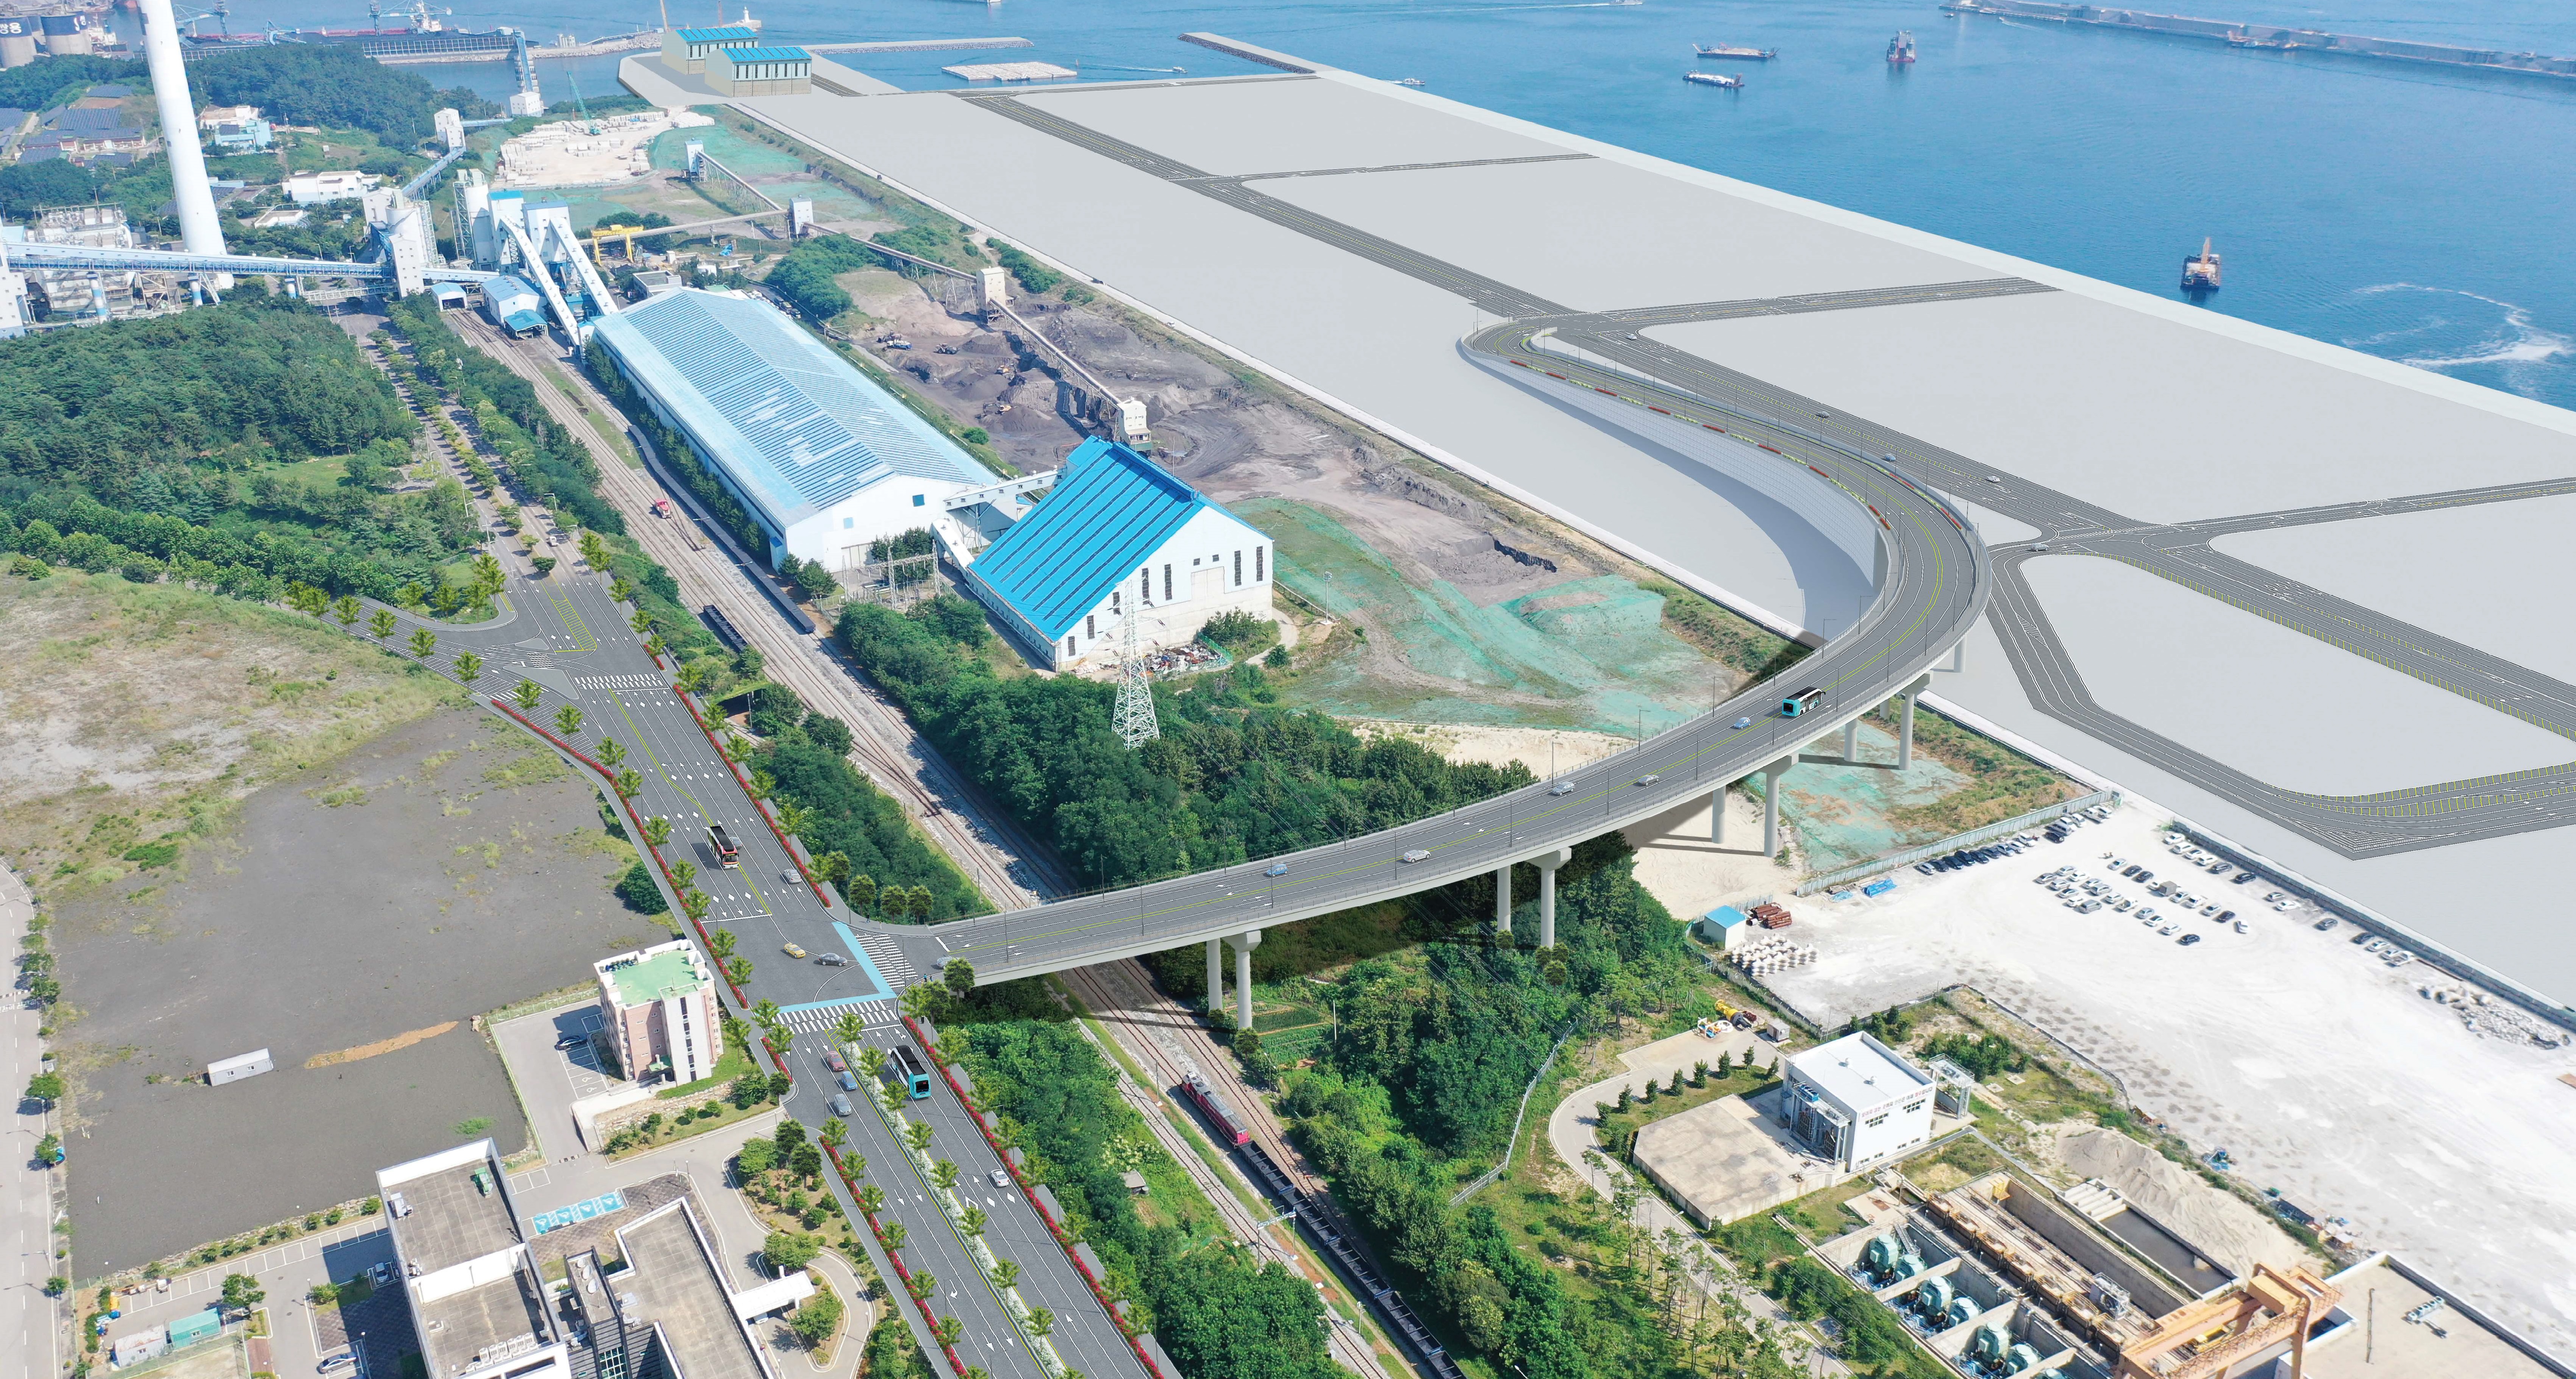 Preliminary and detailed engineering design for Donghae Port stage 3 access road construction work